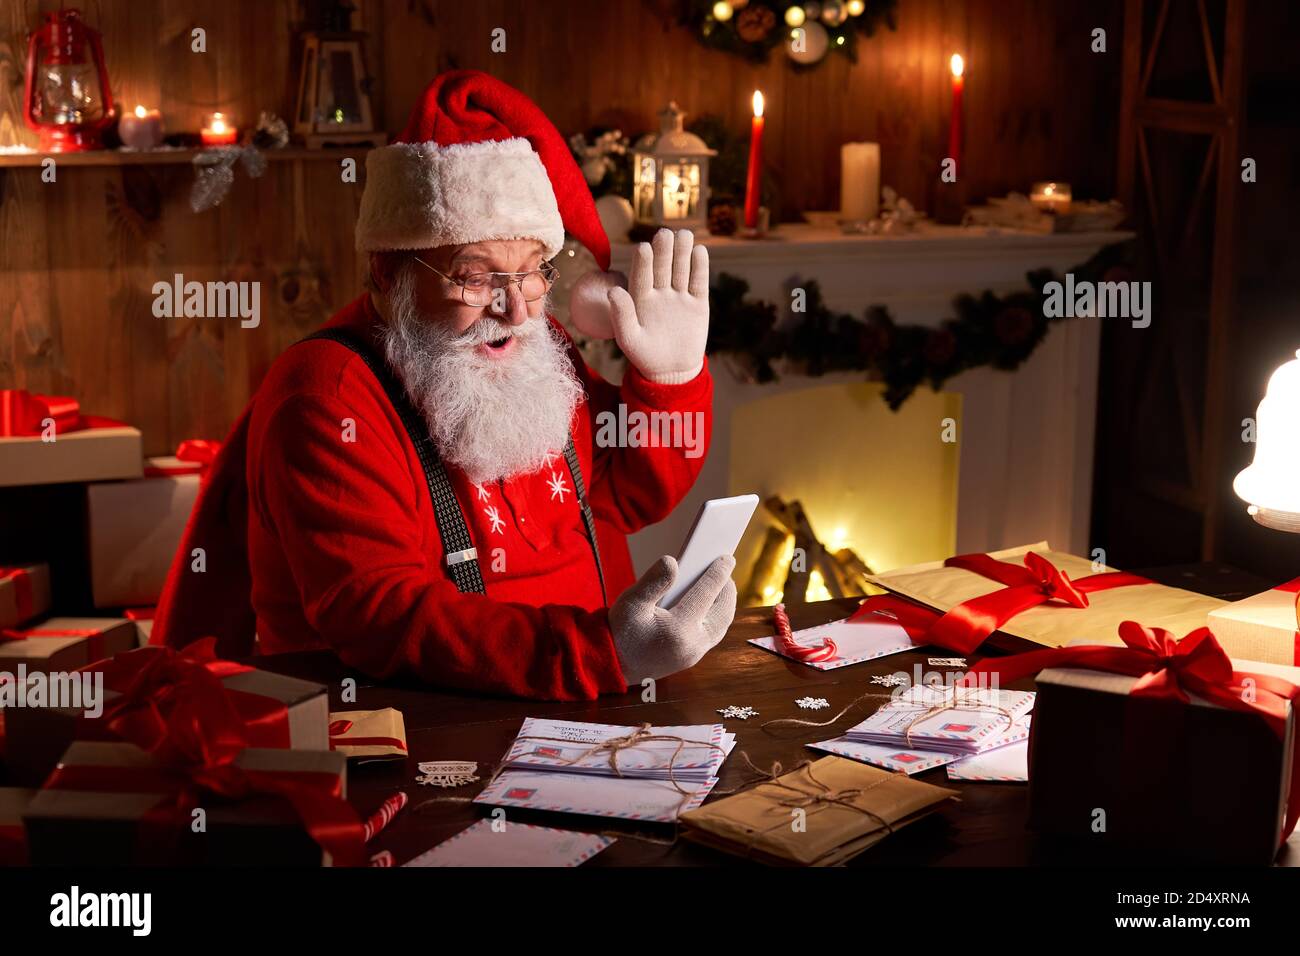 Santa Claus video calling child on smartphone sitting at home table. Stock Photo